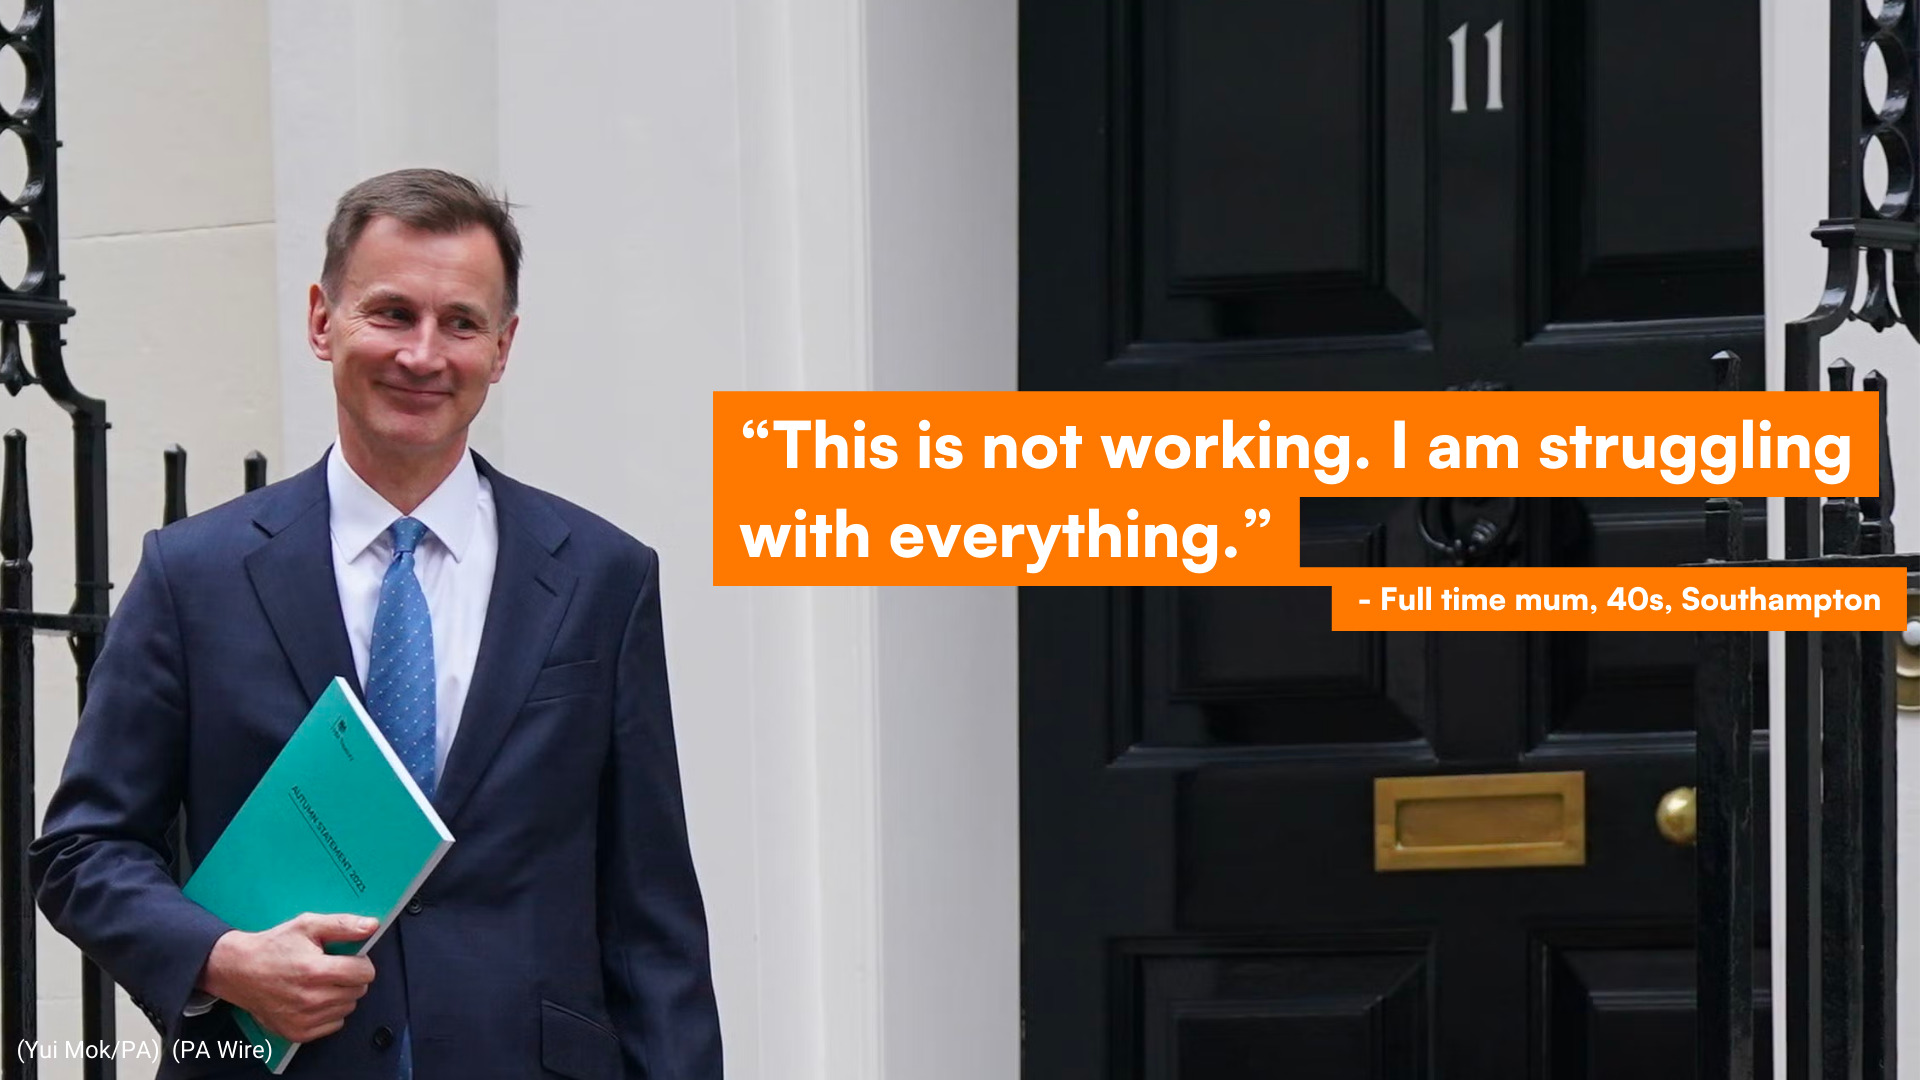 Chancellor Jeremy Hunt stands by 10 Downing St, next to text which says "this is not working, I am struggling with everything."